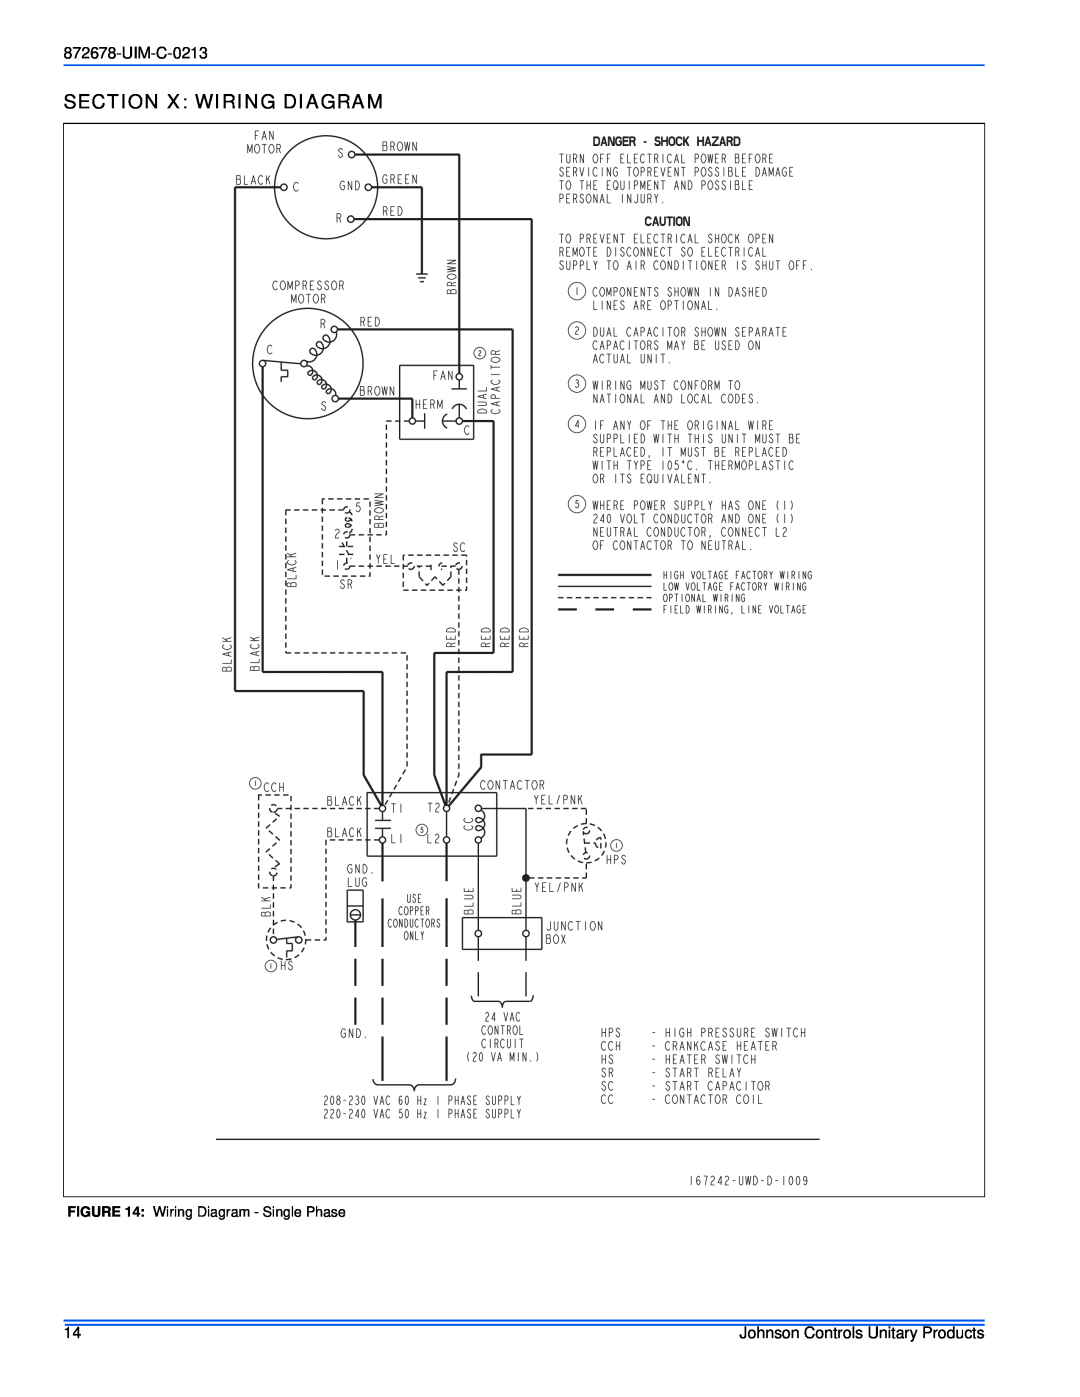 Johnson Controls GCGD, YCJ(D, F) Section X Wiring Diagram, Wiring Diagram - Single Phase, Johnson Controls Unitary Products 